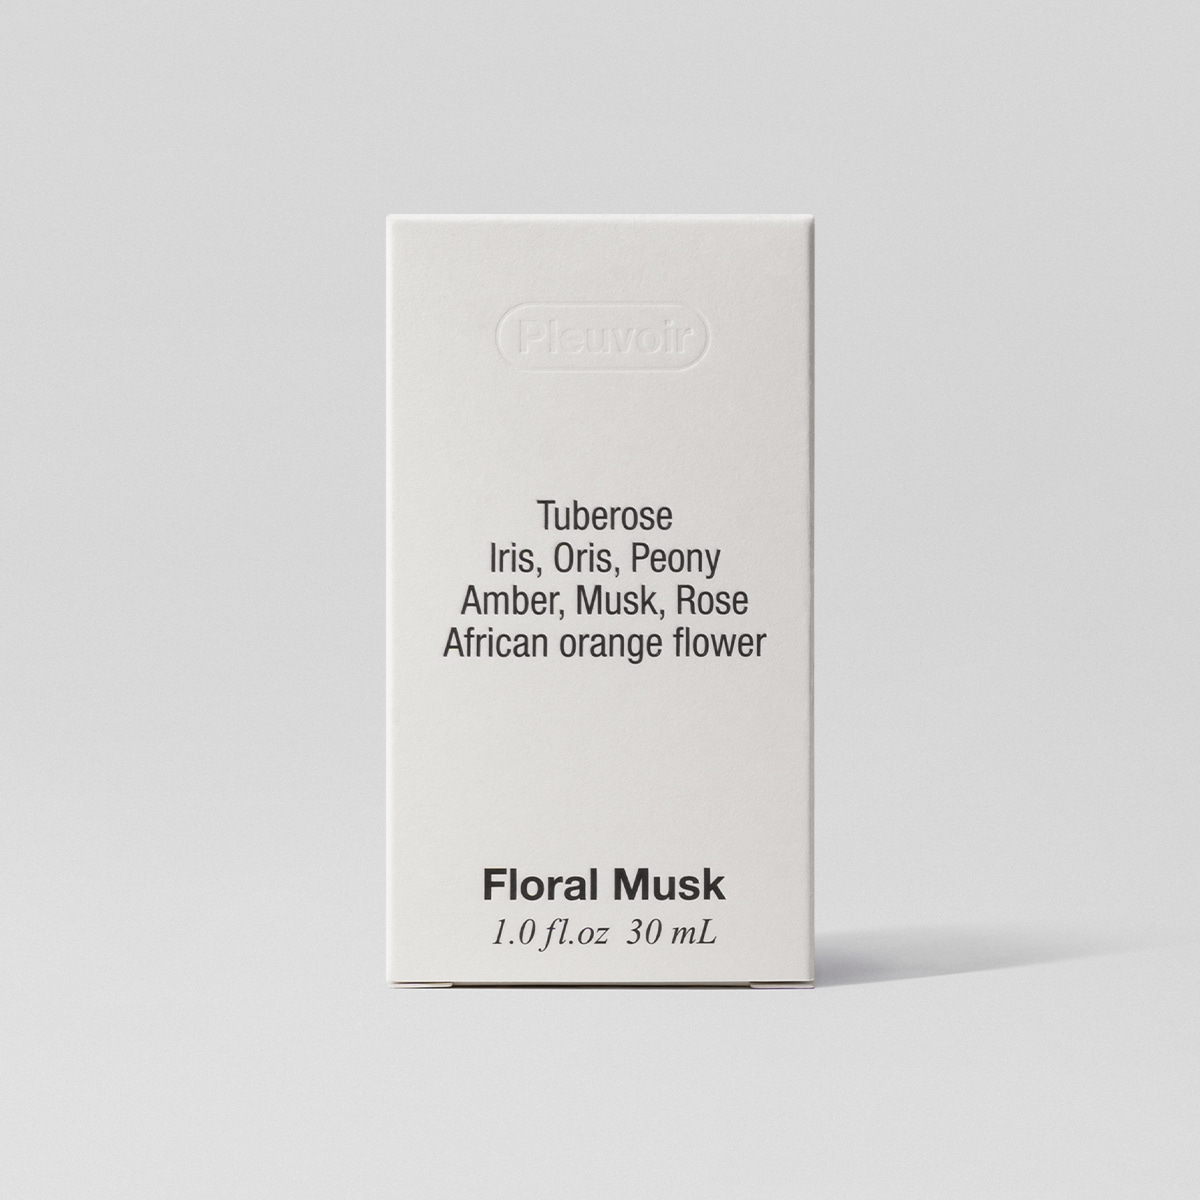 Floral Musk Hand Cream